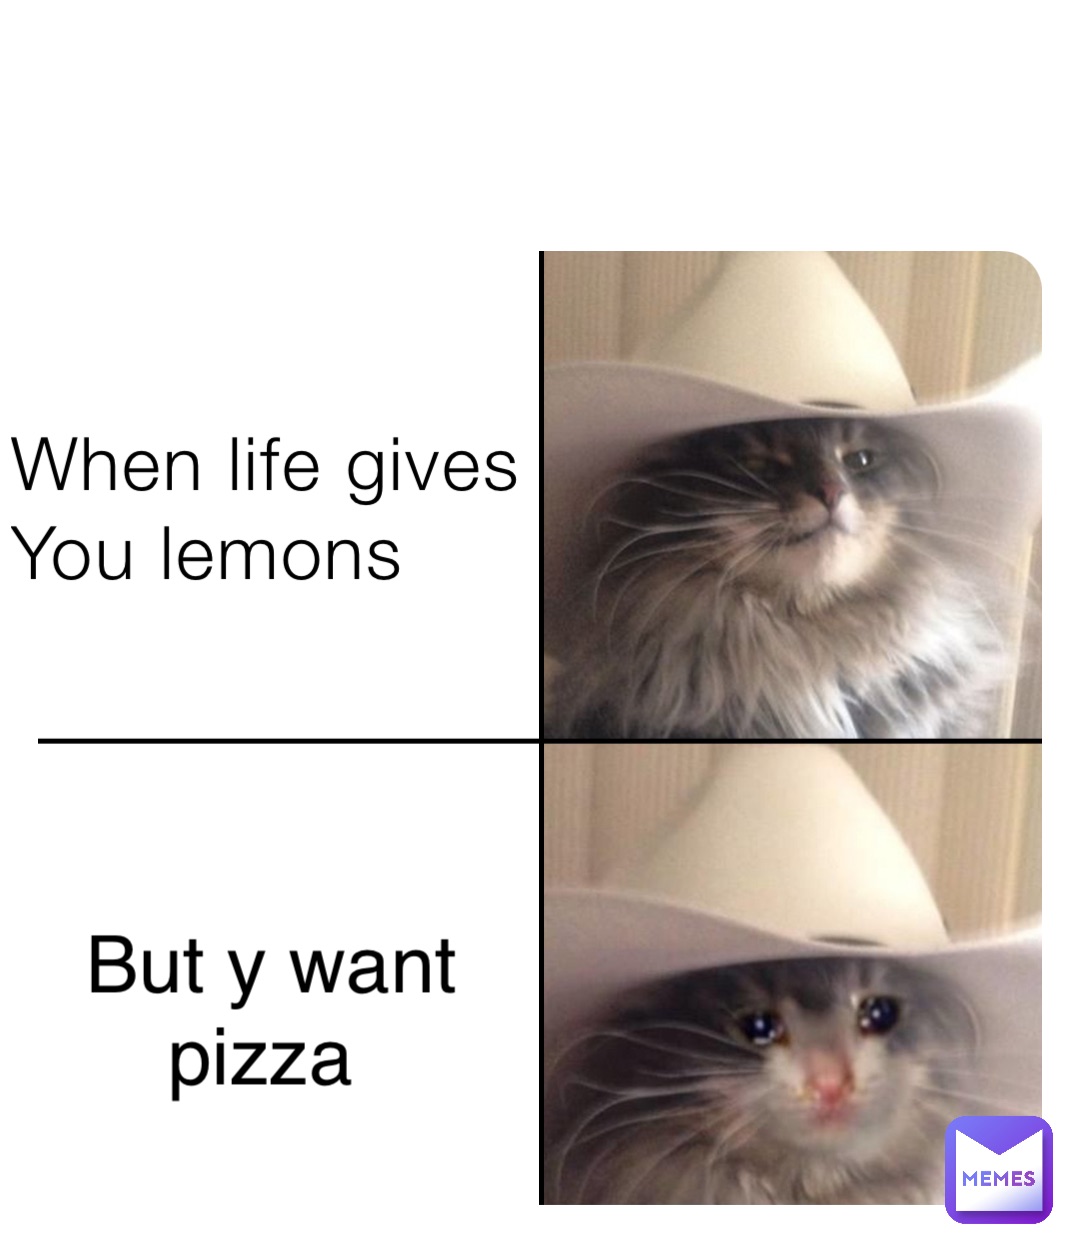 When life gives
You lemons But y want pizza